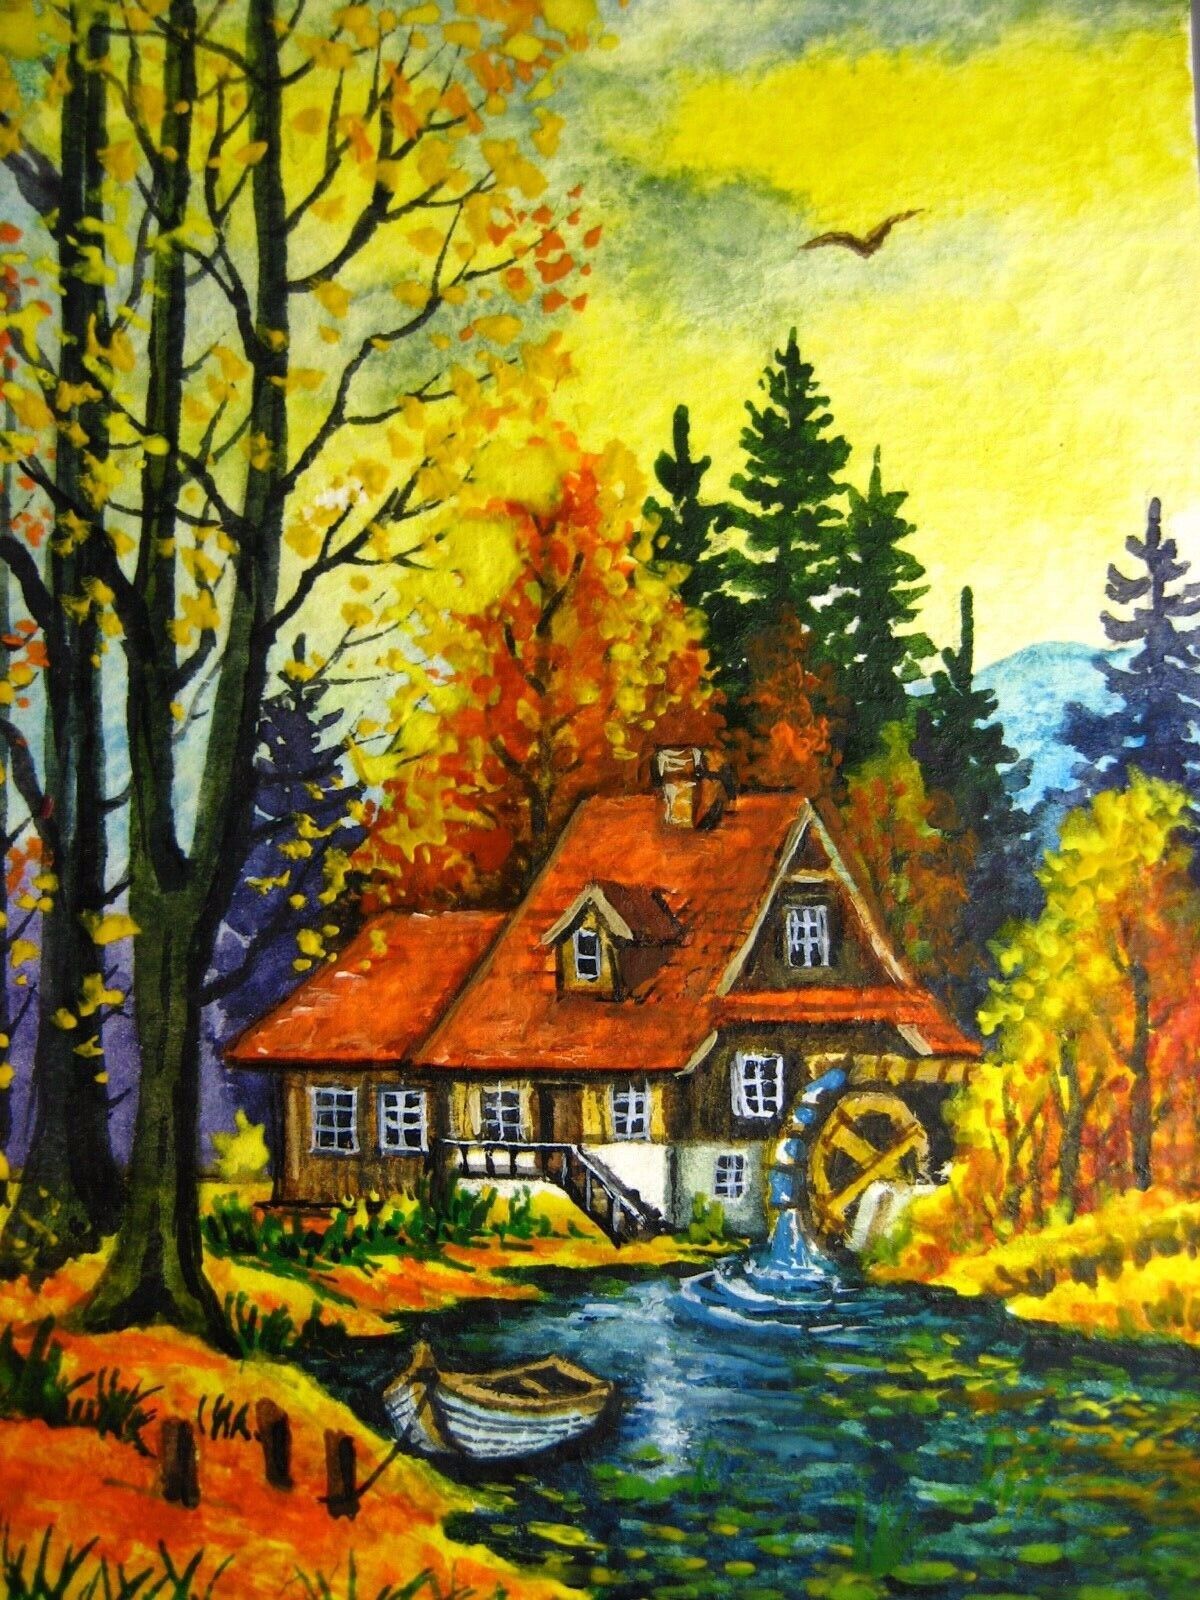 Watercolor Painting Country River House Autumn Forest Nature ACEO Art